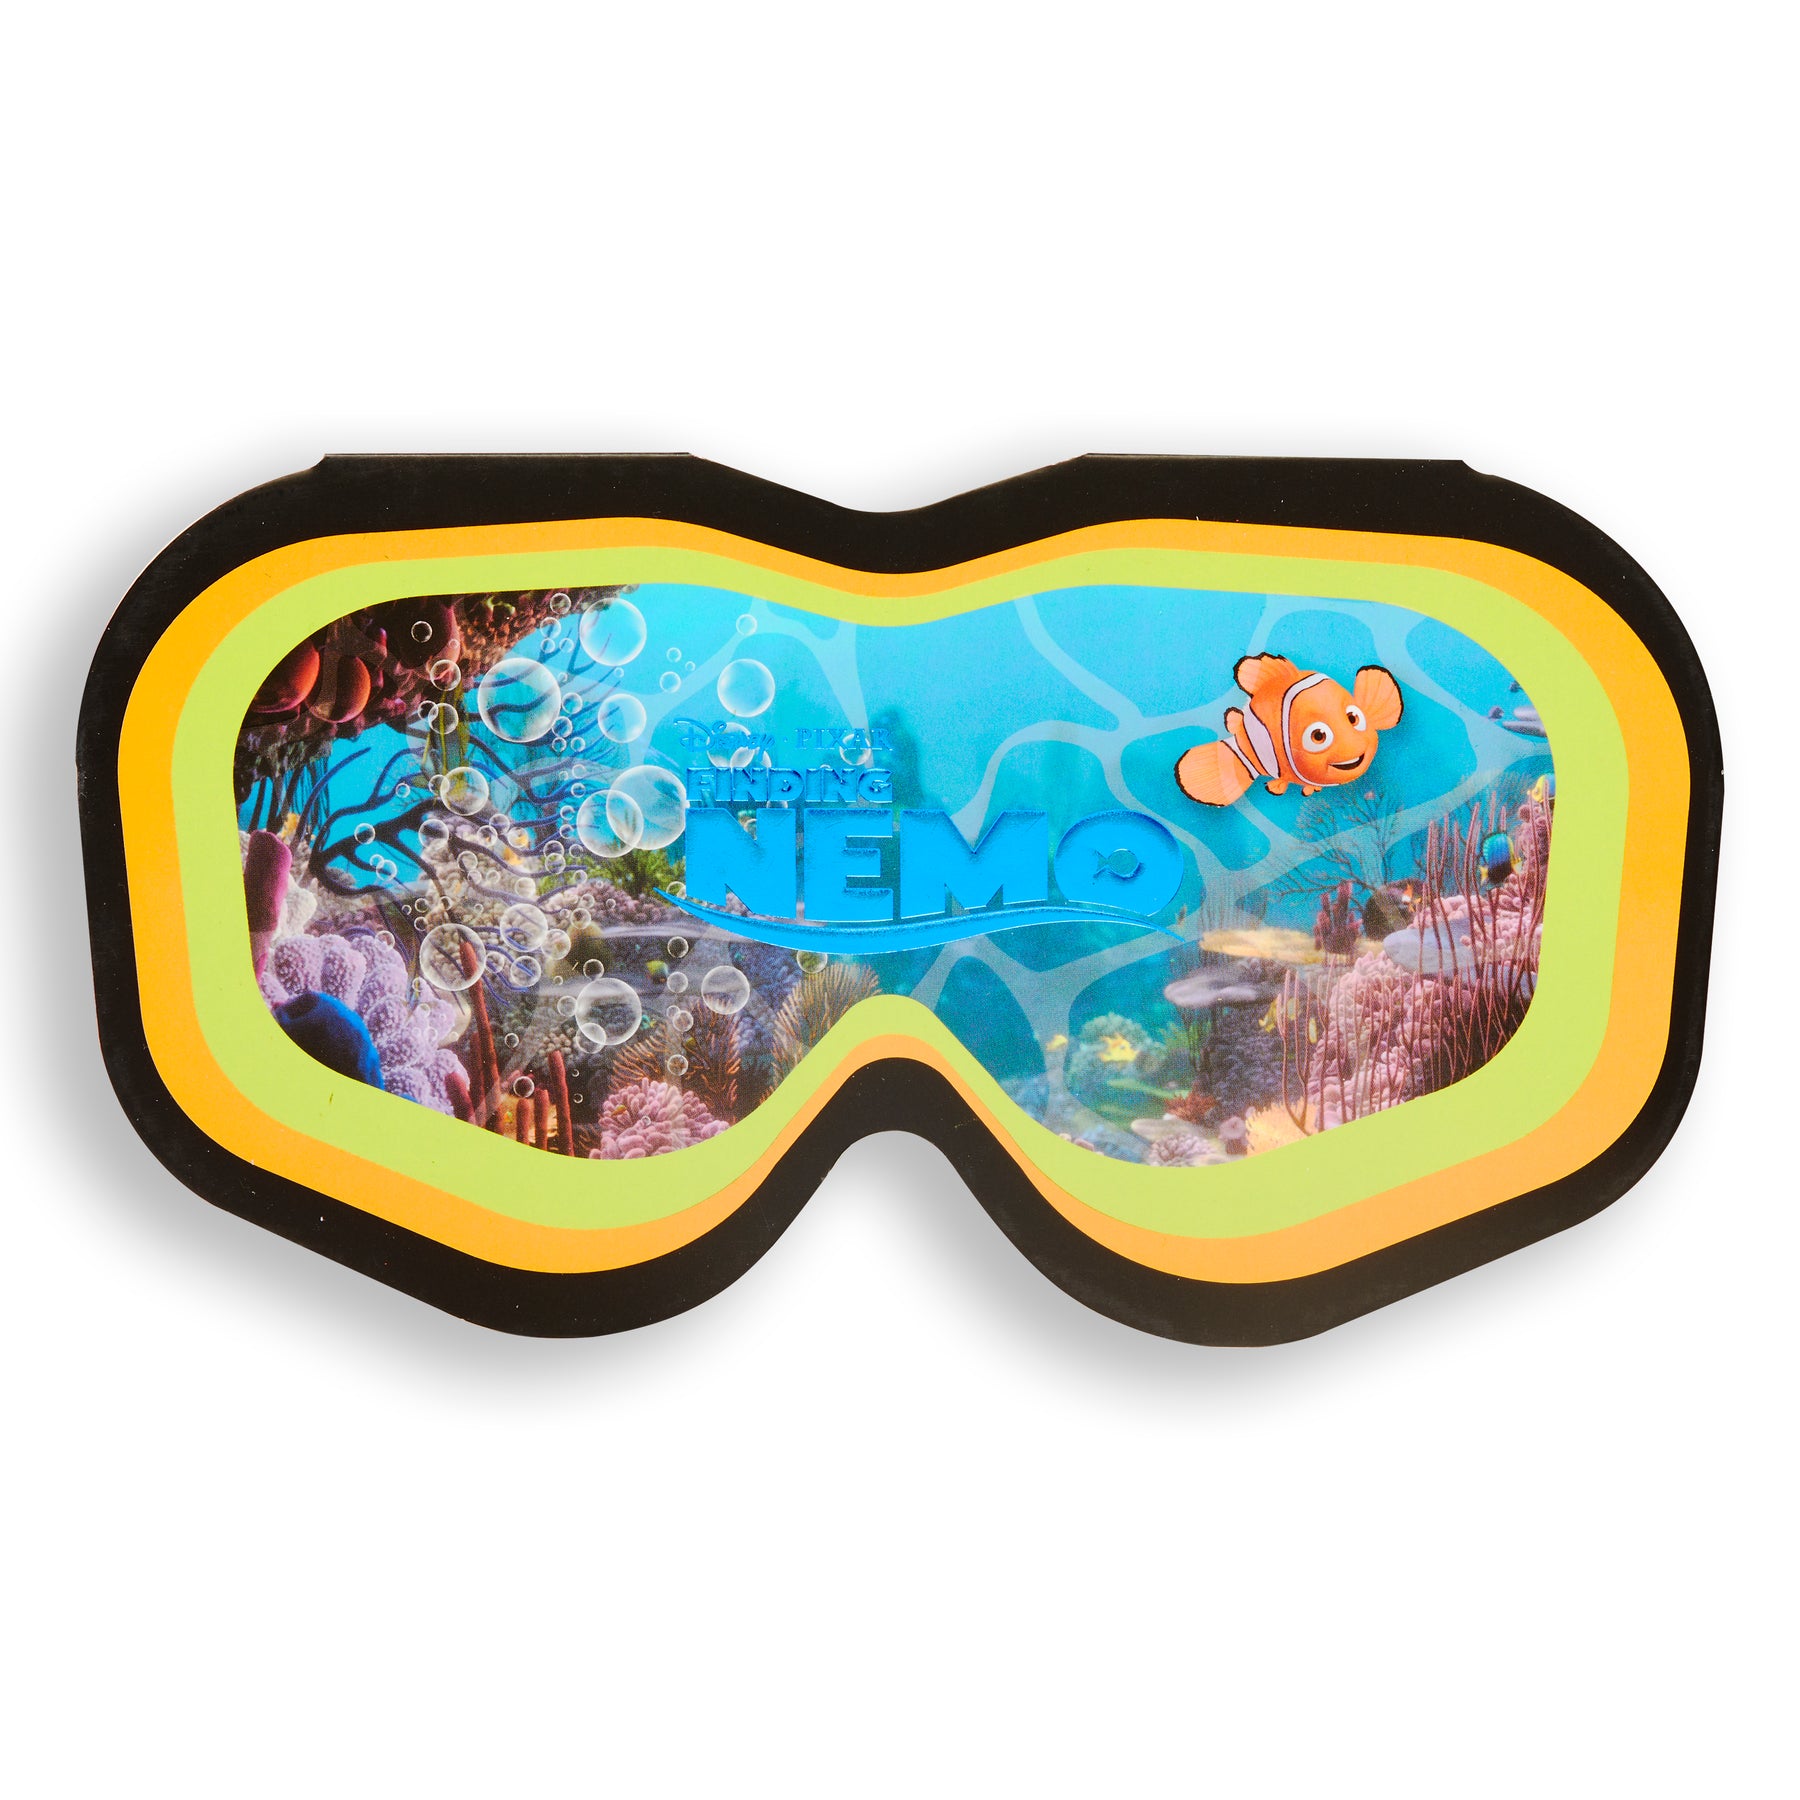 Disney & Pixar’s Finding Nemo and Revolution P. Sherman Shadow Palette OUTLET